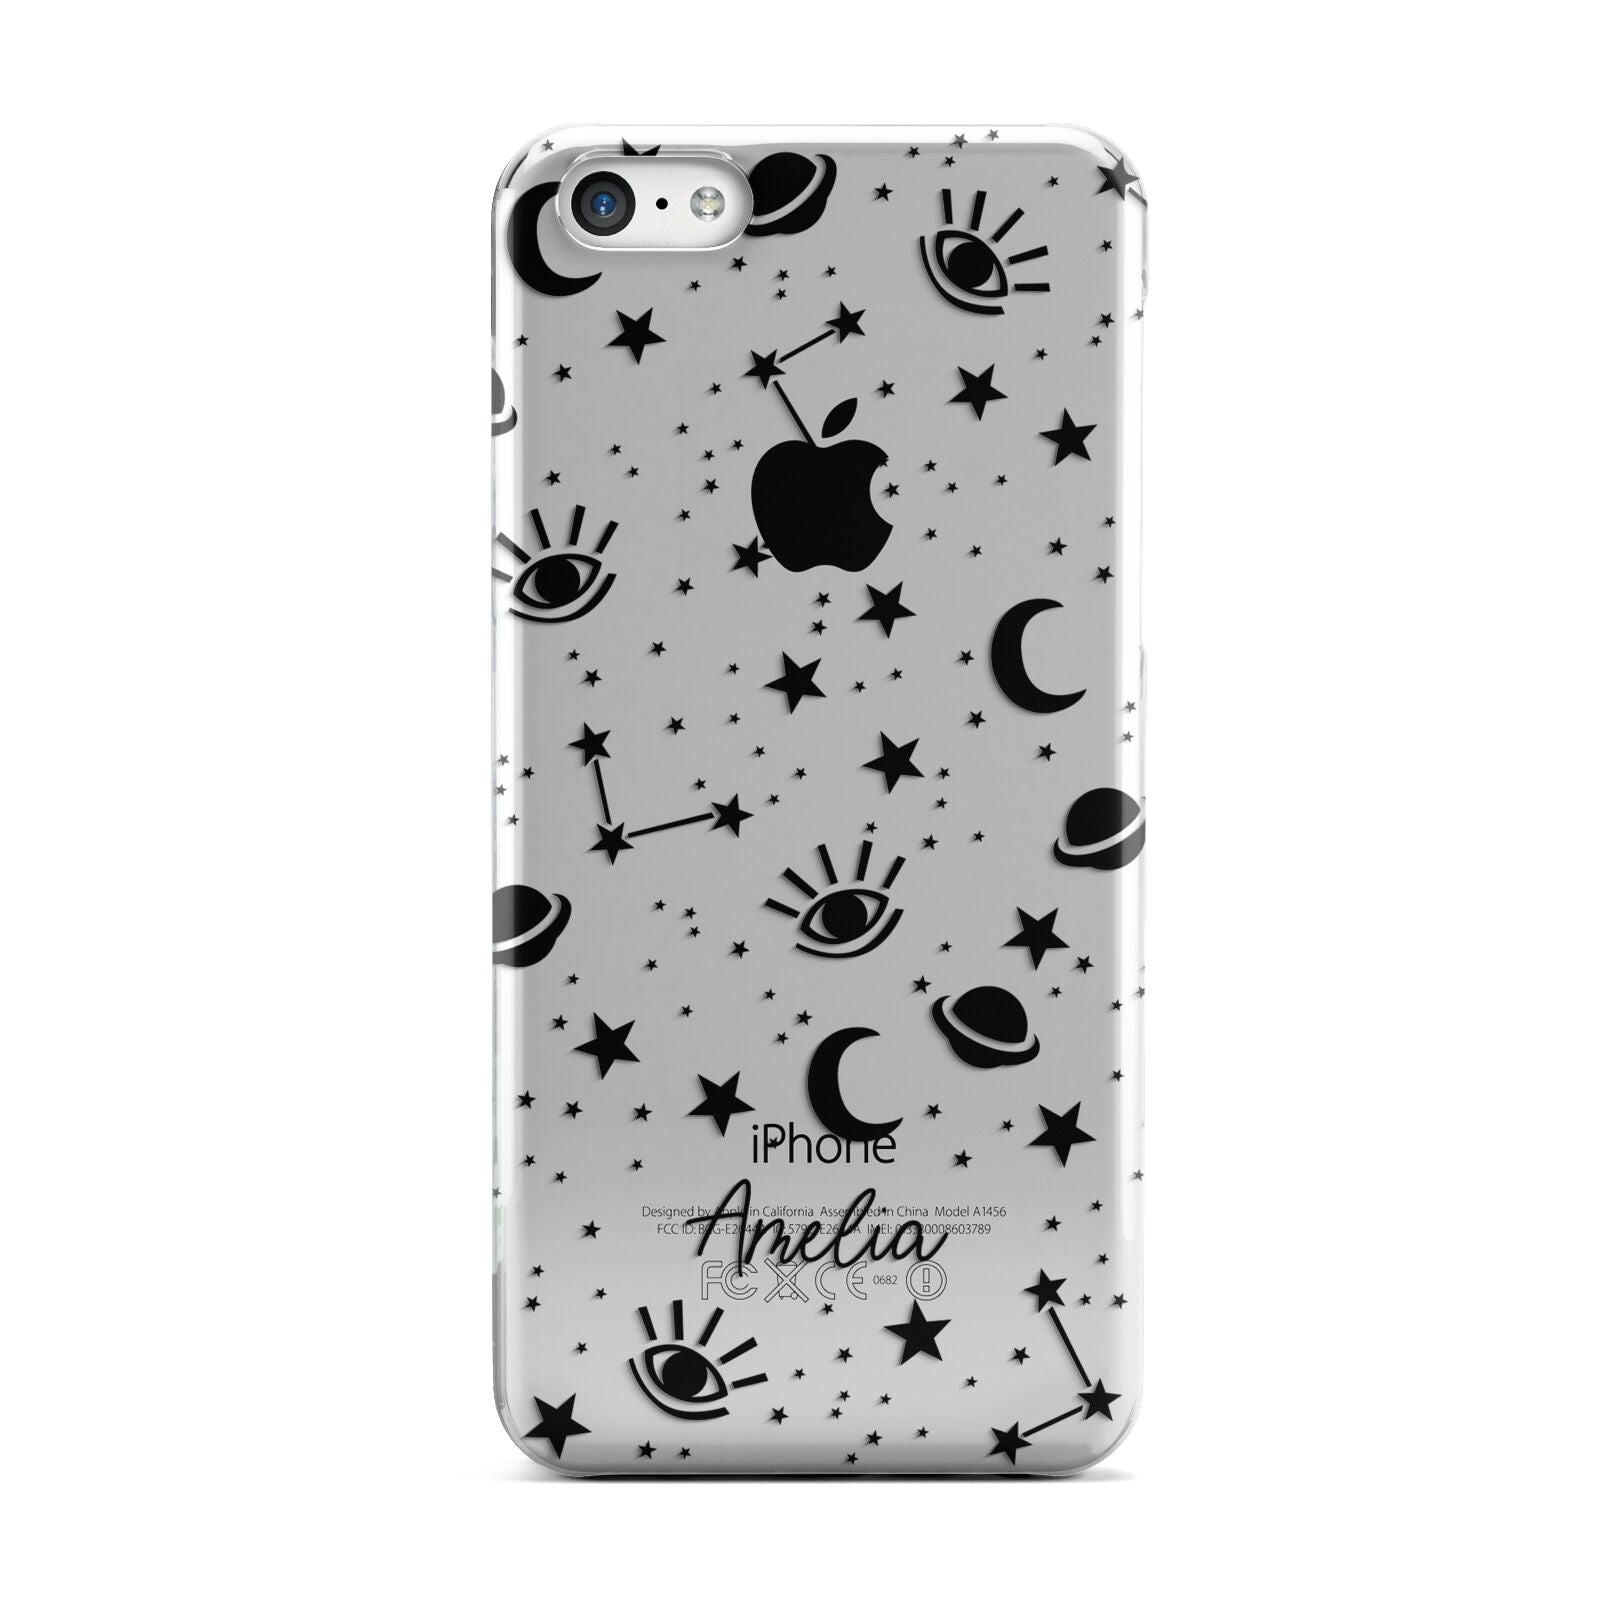 Monochrome Zodiac Constellations with Name Apple iPhone 5c Case